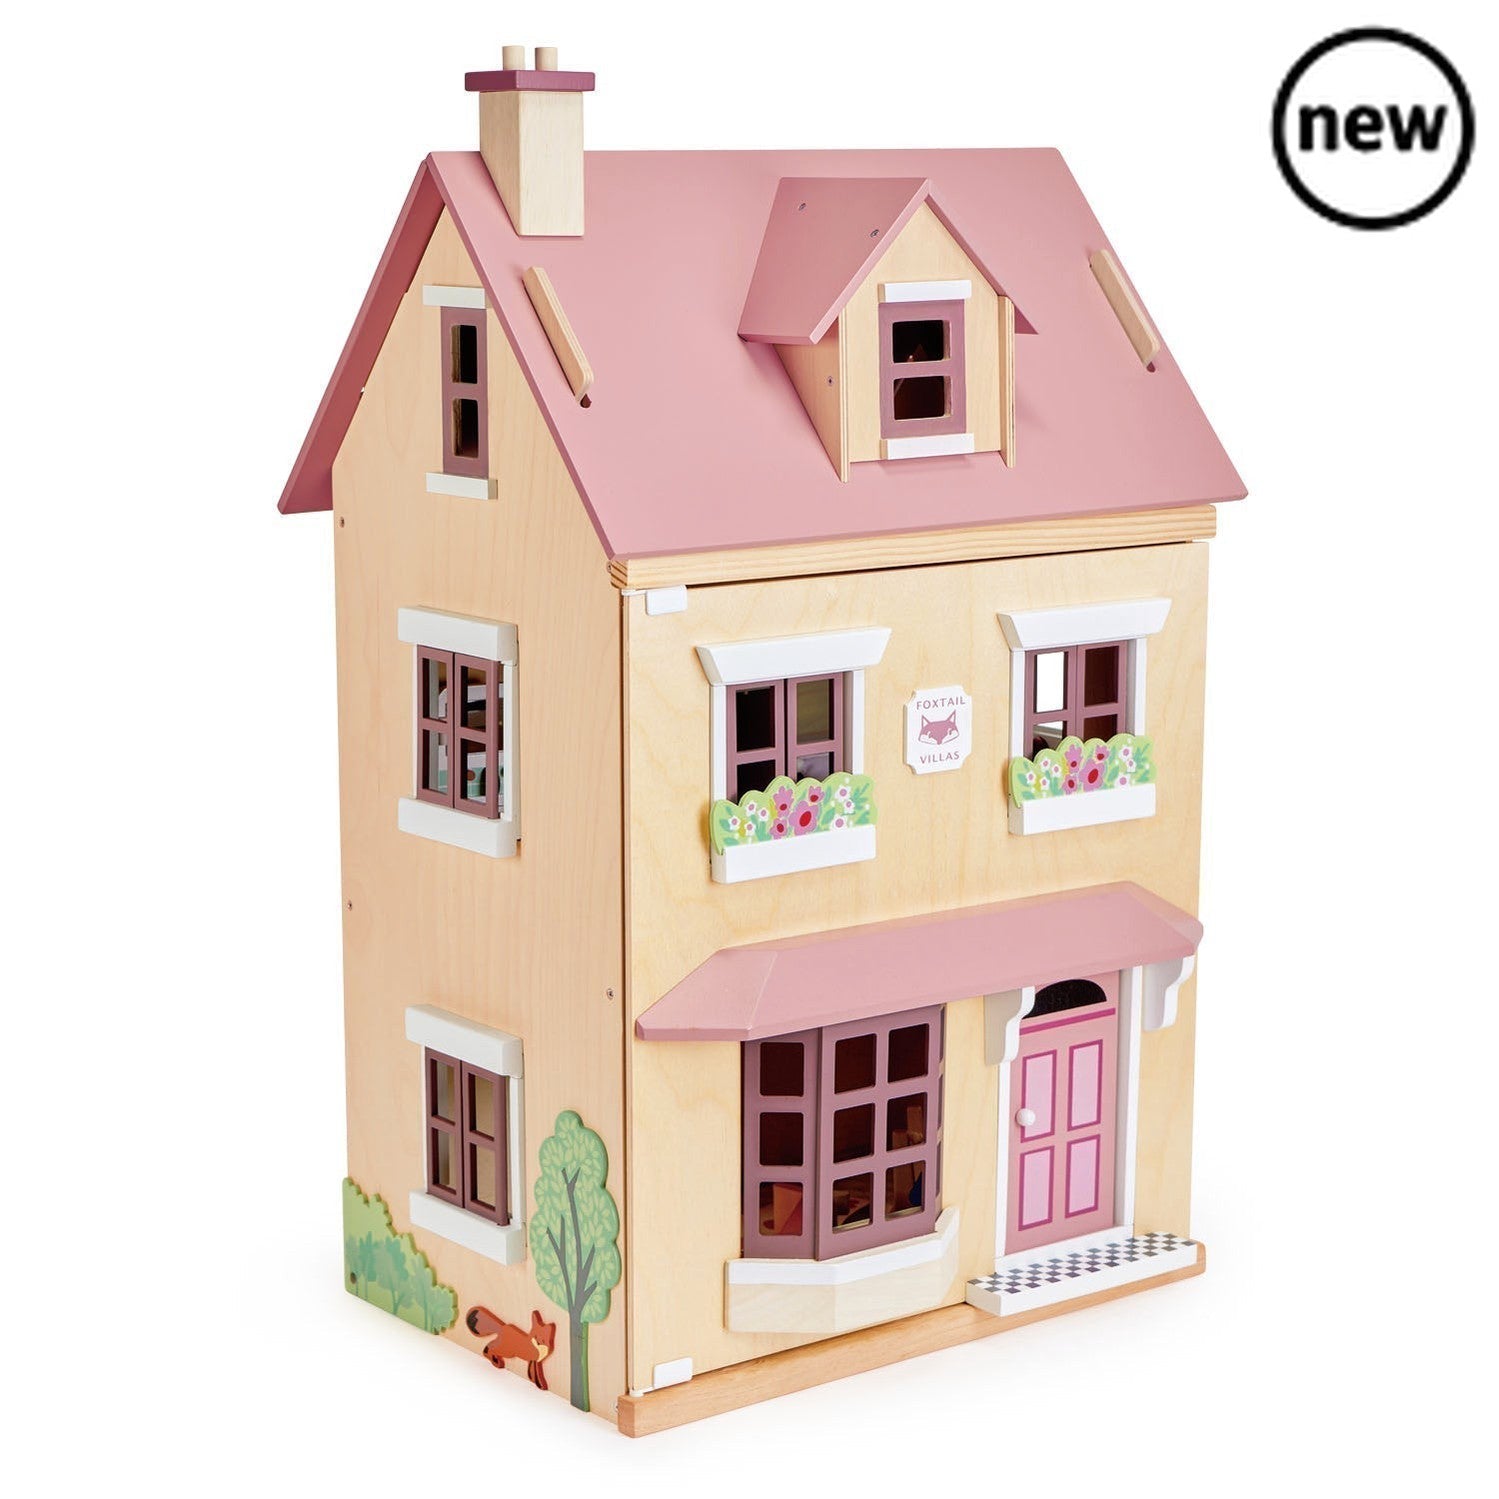 Tenderleaf Foxtail Villa (Pink), Introducing Foxtail Villa, the ultimate town style dolls house that combines exquisite design with endless playtime possibilities. Crafted with careful attention to detail, this mid-sized dolls house is adorned with subtle colors, making it an enchanting addition to your little one's toy collection.With a cleverly designed roof that effortlessly lifts and holds, accessing the attic has never been easier. Let your child's imagination soar as they create their own little world